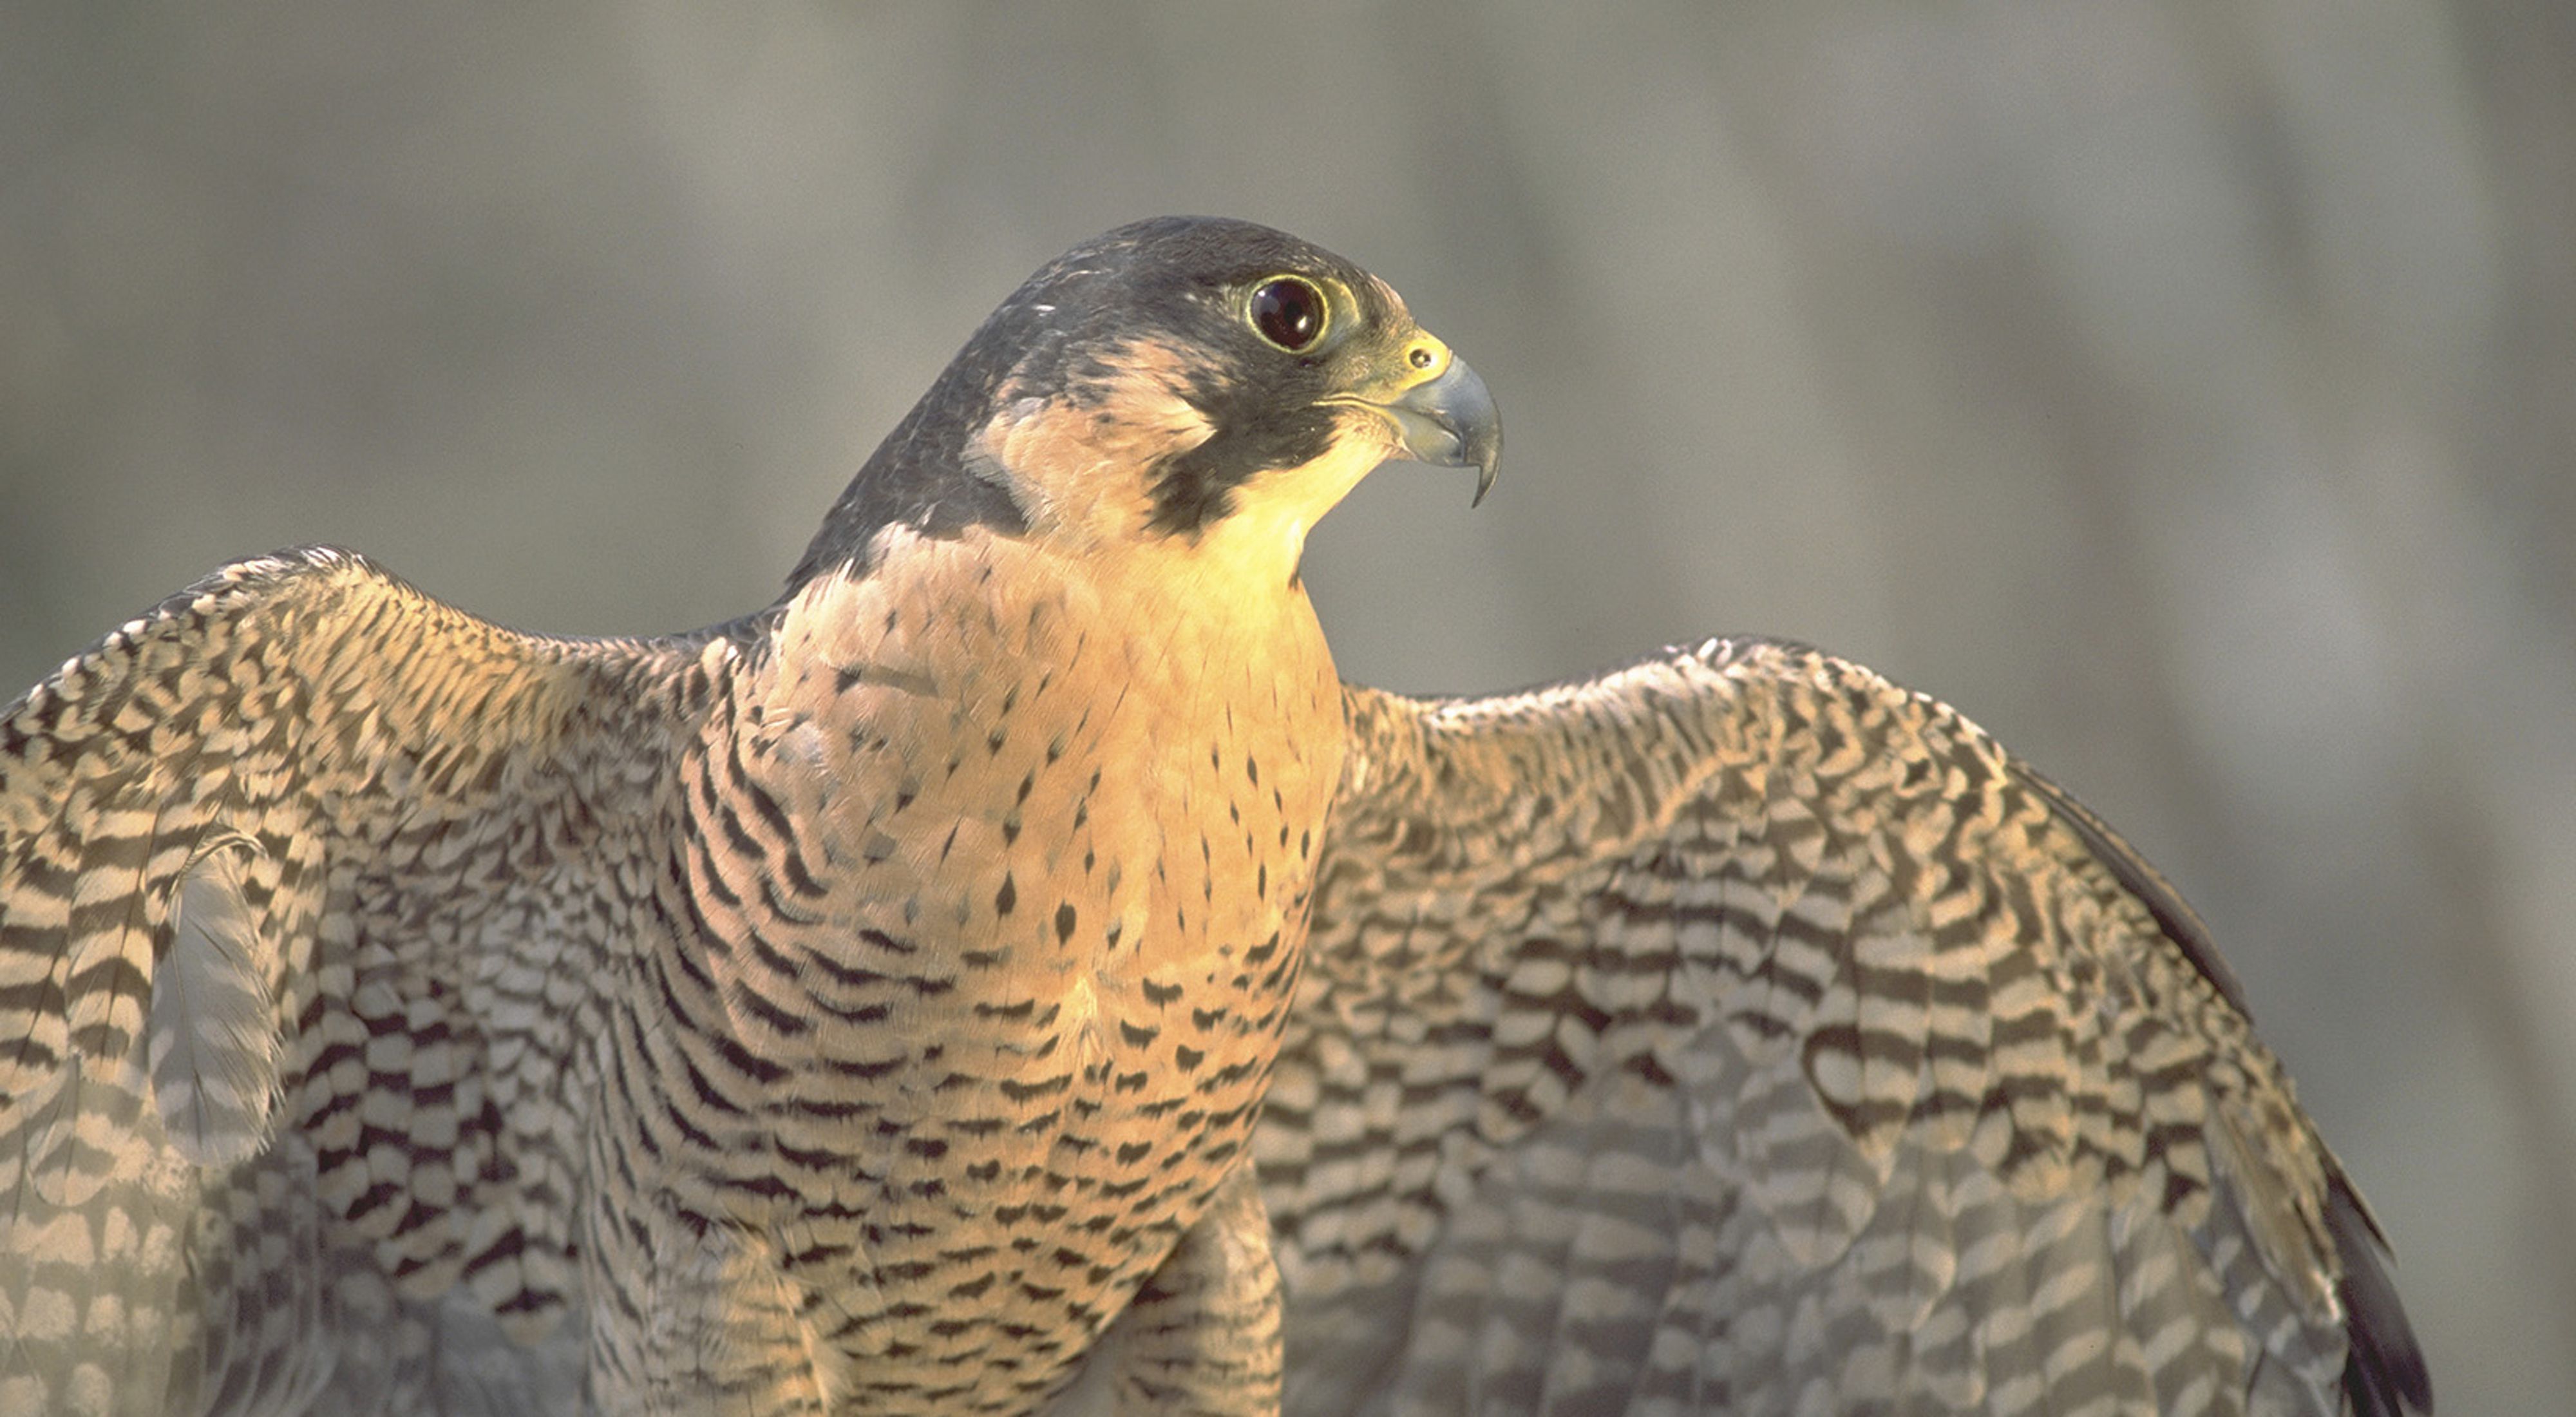 Close up view of a black and white patterned falcon that is looking to the right-hand side of the frame.